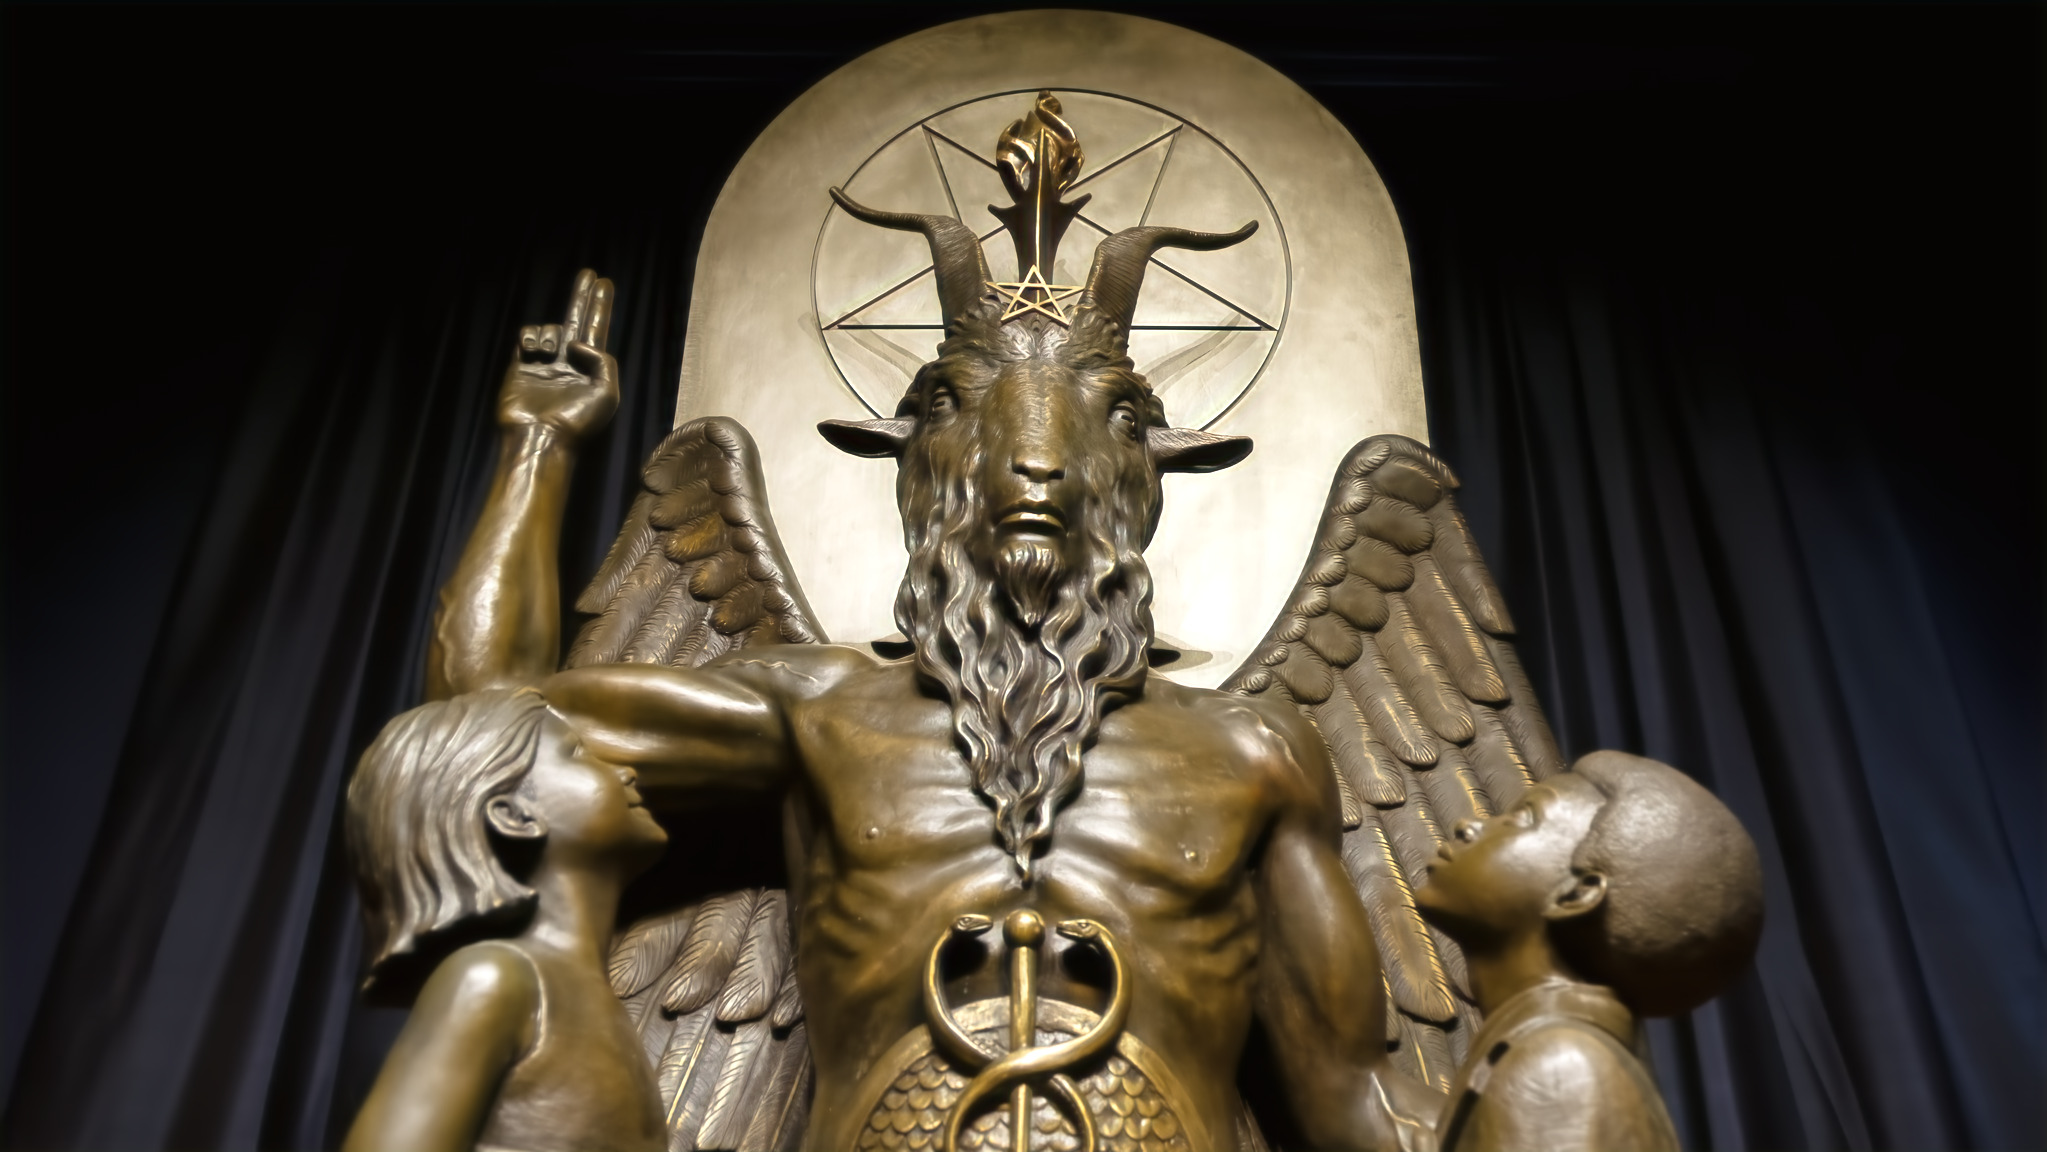 Satan Afterschool: Close ip of bronze stature of Baphimet, a traditional depiction of satan with horned goat head and wings in front of pentagram with right hand pointing to sky. A young boy and girl stand on either side of his knees looking up to him.